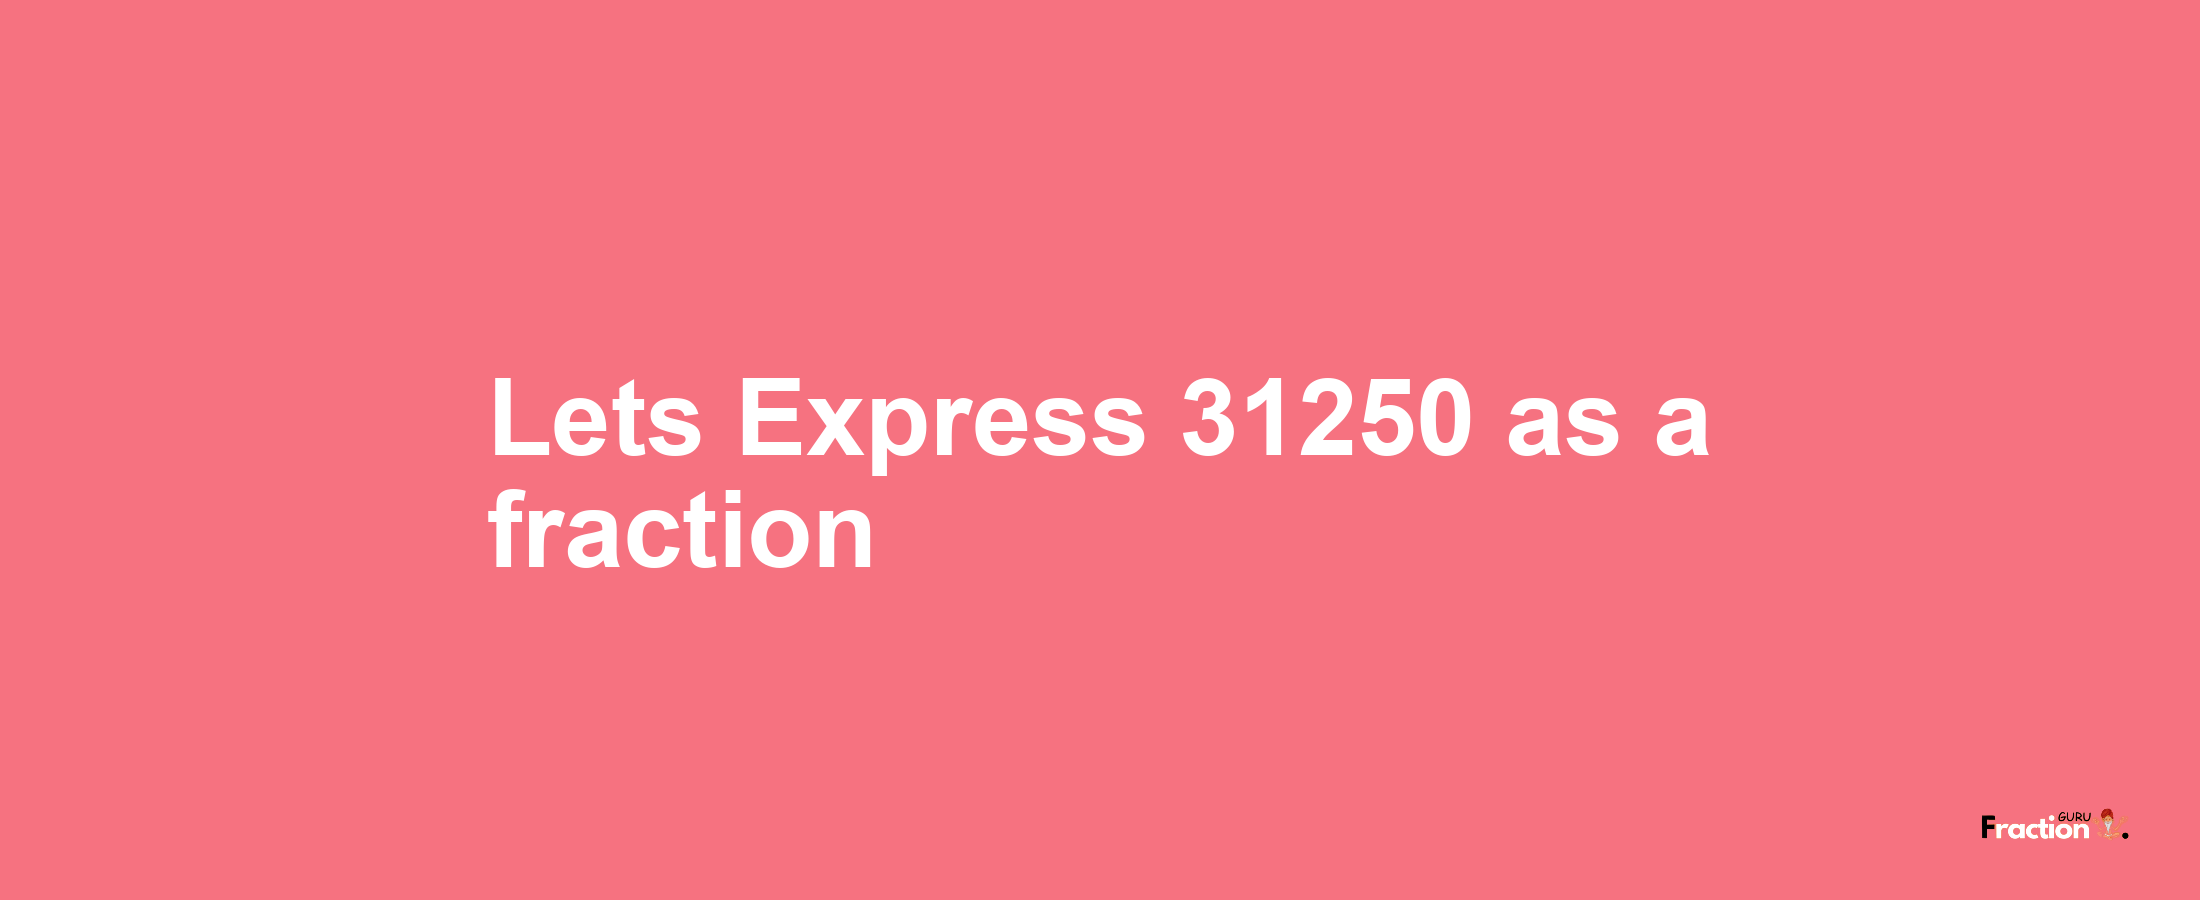 Lets Express 31250 as afraction